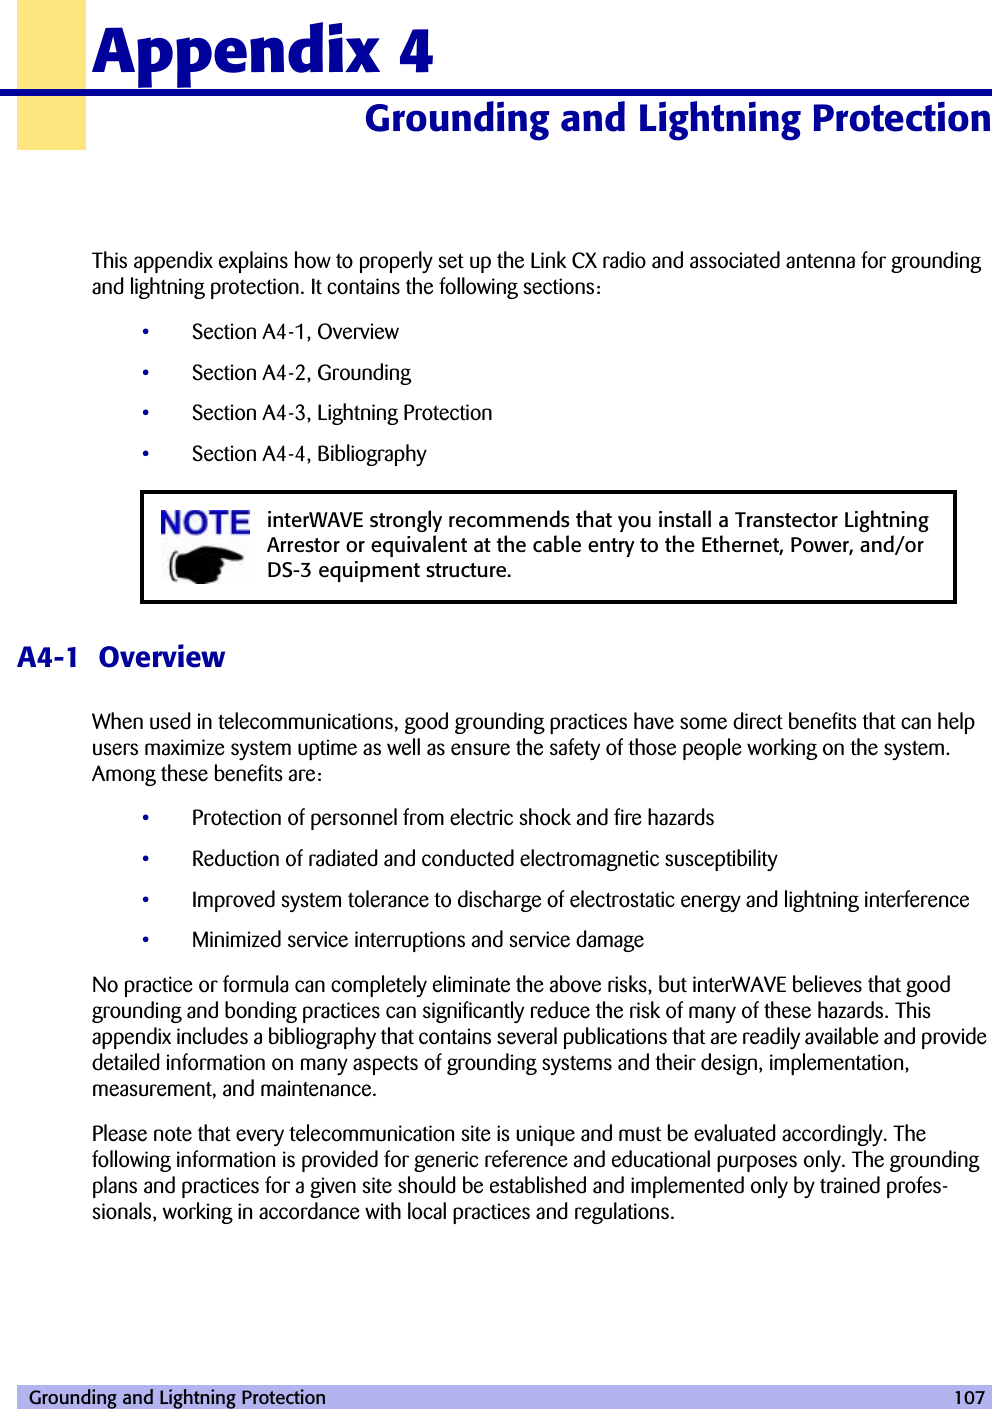  Grounding and Lightning Protection 107Appendix 4Grounding and Lightning Protection 40000 This appendix explains how to properly set up the Link CX radio and associated antenna for grounding and lightning protection. It contains the following sections:•Section A4-1, Overview•Section A4-2, Grounding•Section A4-3, Lightning Protection•Section A4-4, BibliographyA4-1  OverviewWhen used in telecommunications, good grounding practices have some direct benefits that can help users maximize system uptime as well as ensure the safety of those people working on the system. Among these benefits are:•Protection of personnel from electric shock and fire hazards•Reduction of radiated and conducted electromagnetic susceptibility•Improved system tolerance to discharge of electrostatic energy and lightning interference•Minimized service interruptions and service damageNo practice or formula can completely eliminate the above risks, but interWAVE believes that good grounding and bonding practices can significantly reduce the risk of many of these hazards. This appendix includes a bibliography that contains several publications that are readily available and provide detailed information on many aspects of grounding systems and their design, implementation, measurement, and maintenance.Please note that every telecommunication site is unique and must be evaluated accordingly. The following information is provided for generic reference and educational purposes only. The grounding plans and practices for a given site should be established and implemented only by trained profes-sionals, working in accordance with local practices and regulations.interWAVE strongly recommends that you install a Transtector Lightning Arrestor or equivalent at the cable entry to the Ethernet, Power, and/or DS-3 equipment structure.